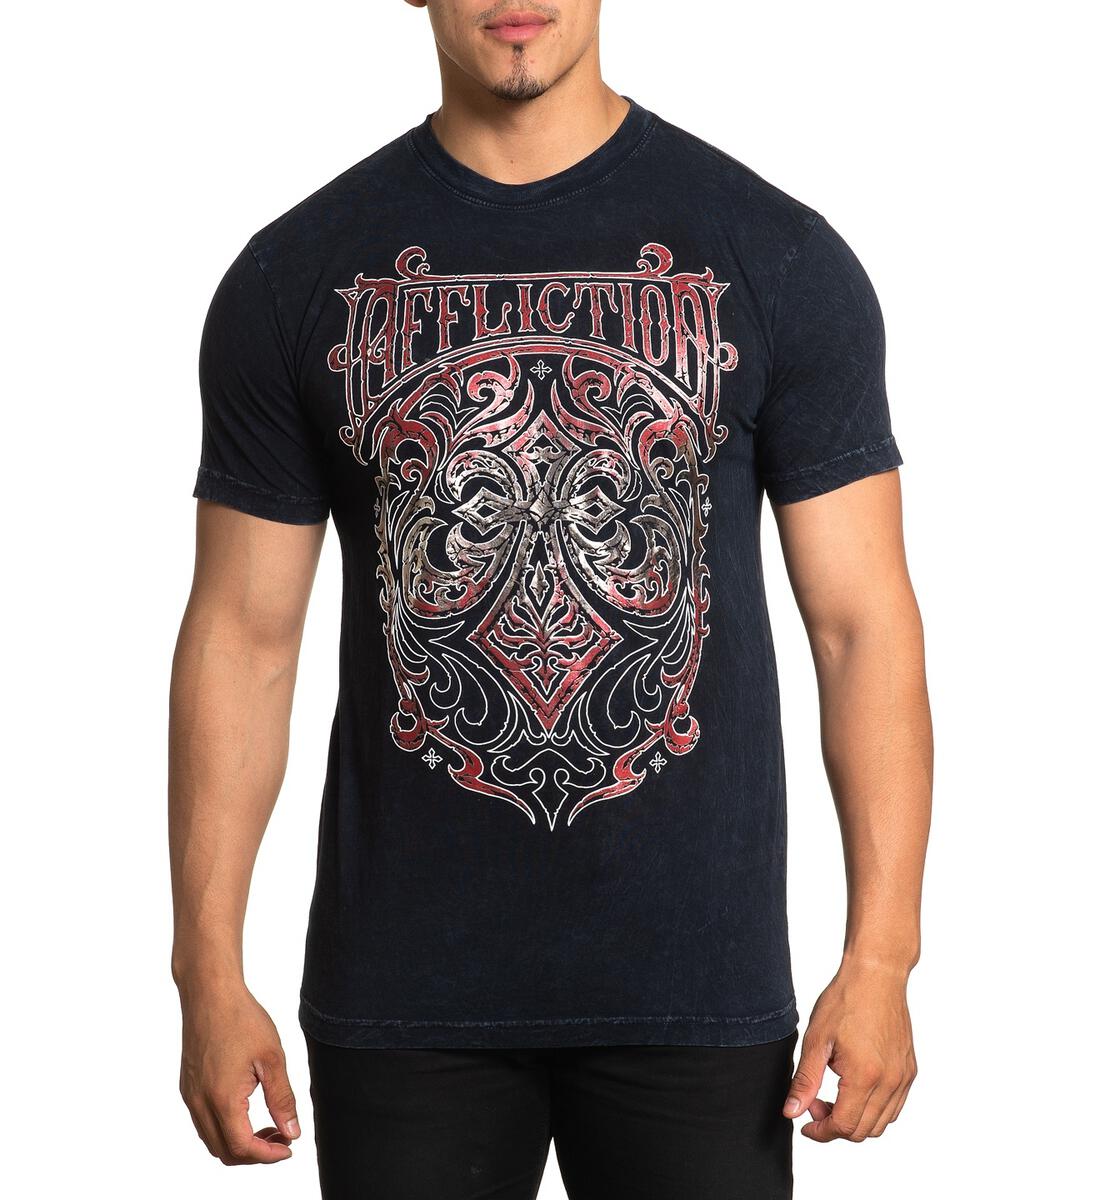 Affliction Marblesmith Tee - Harley Davidson of Quantico